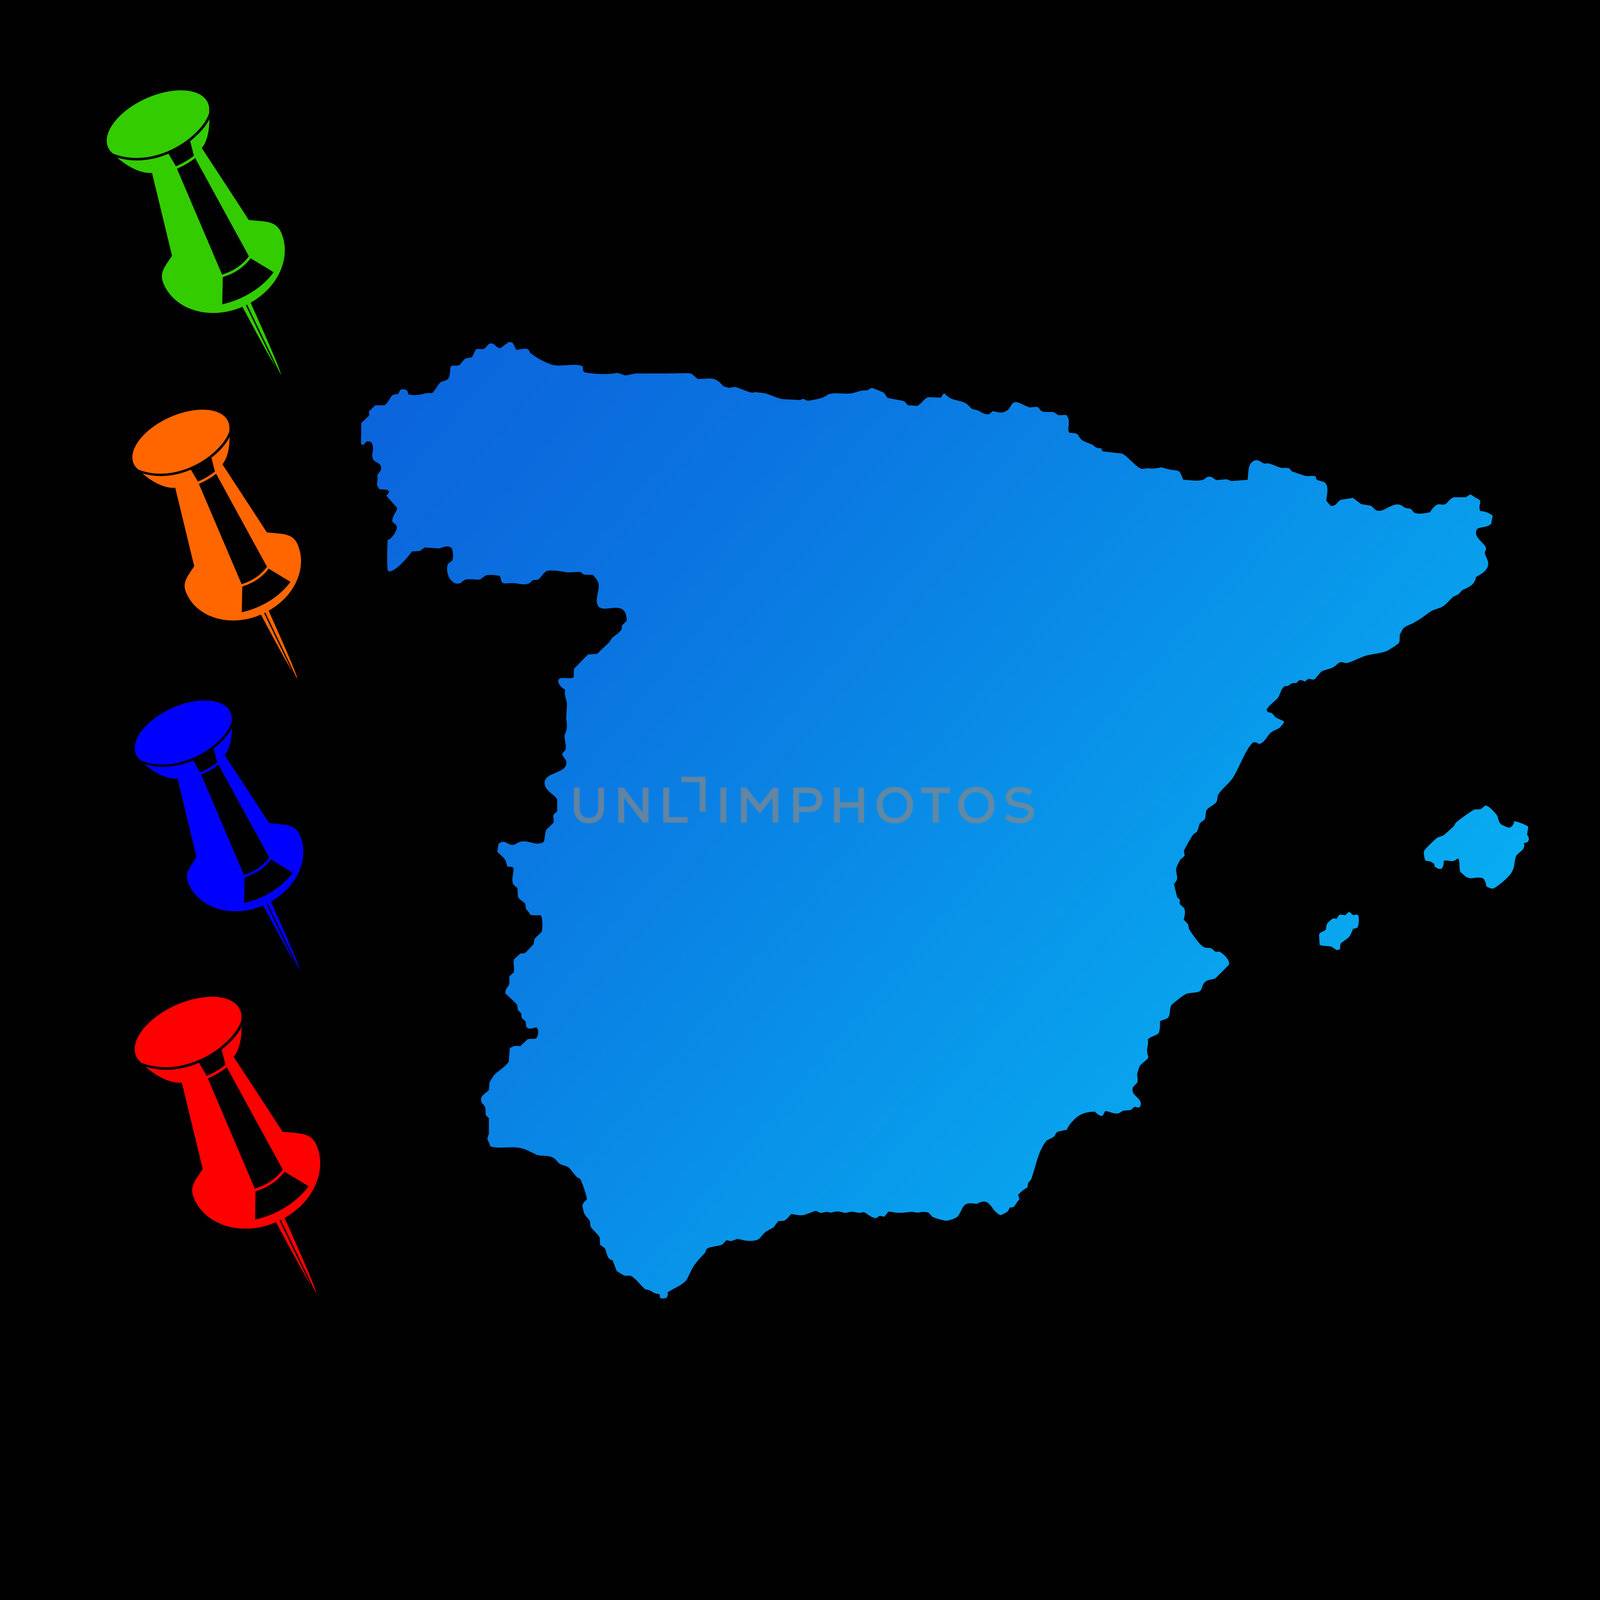 Spain travel map with push pins on black background.